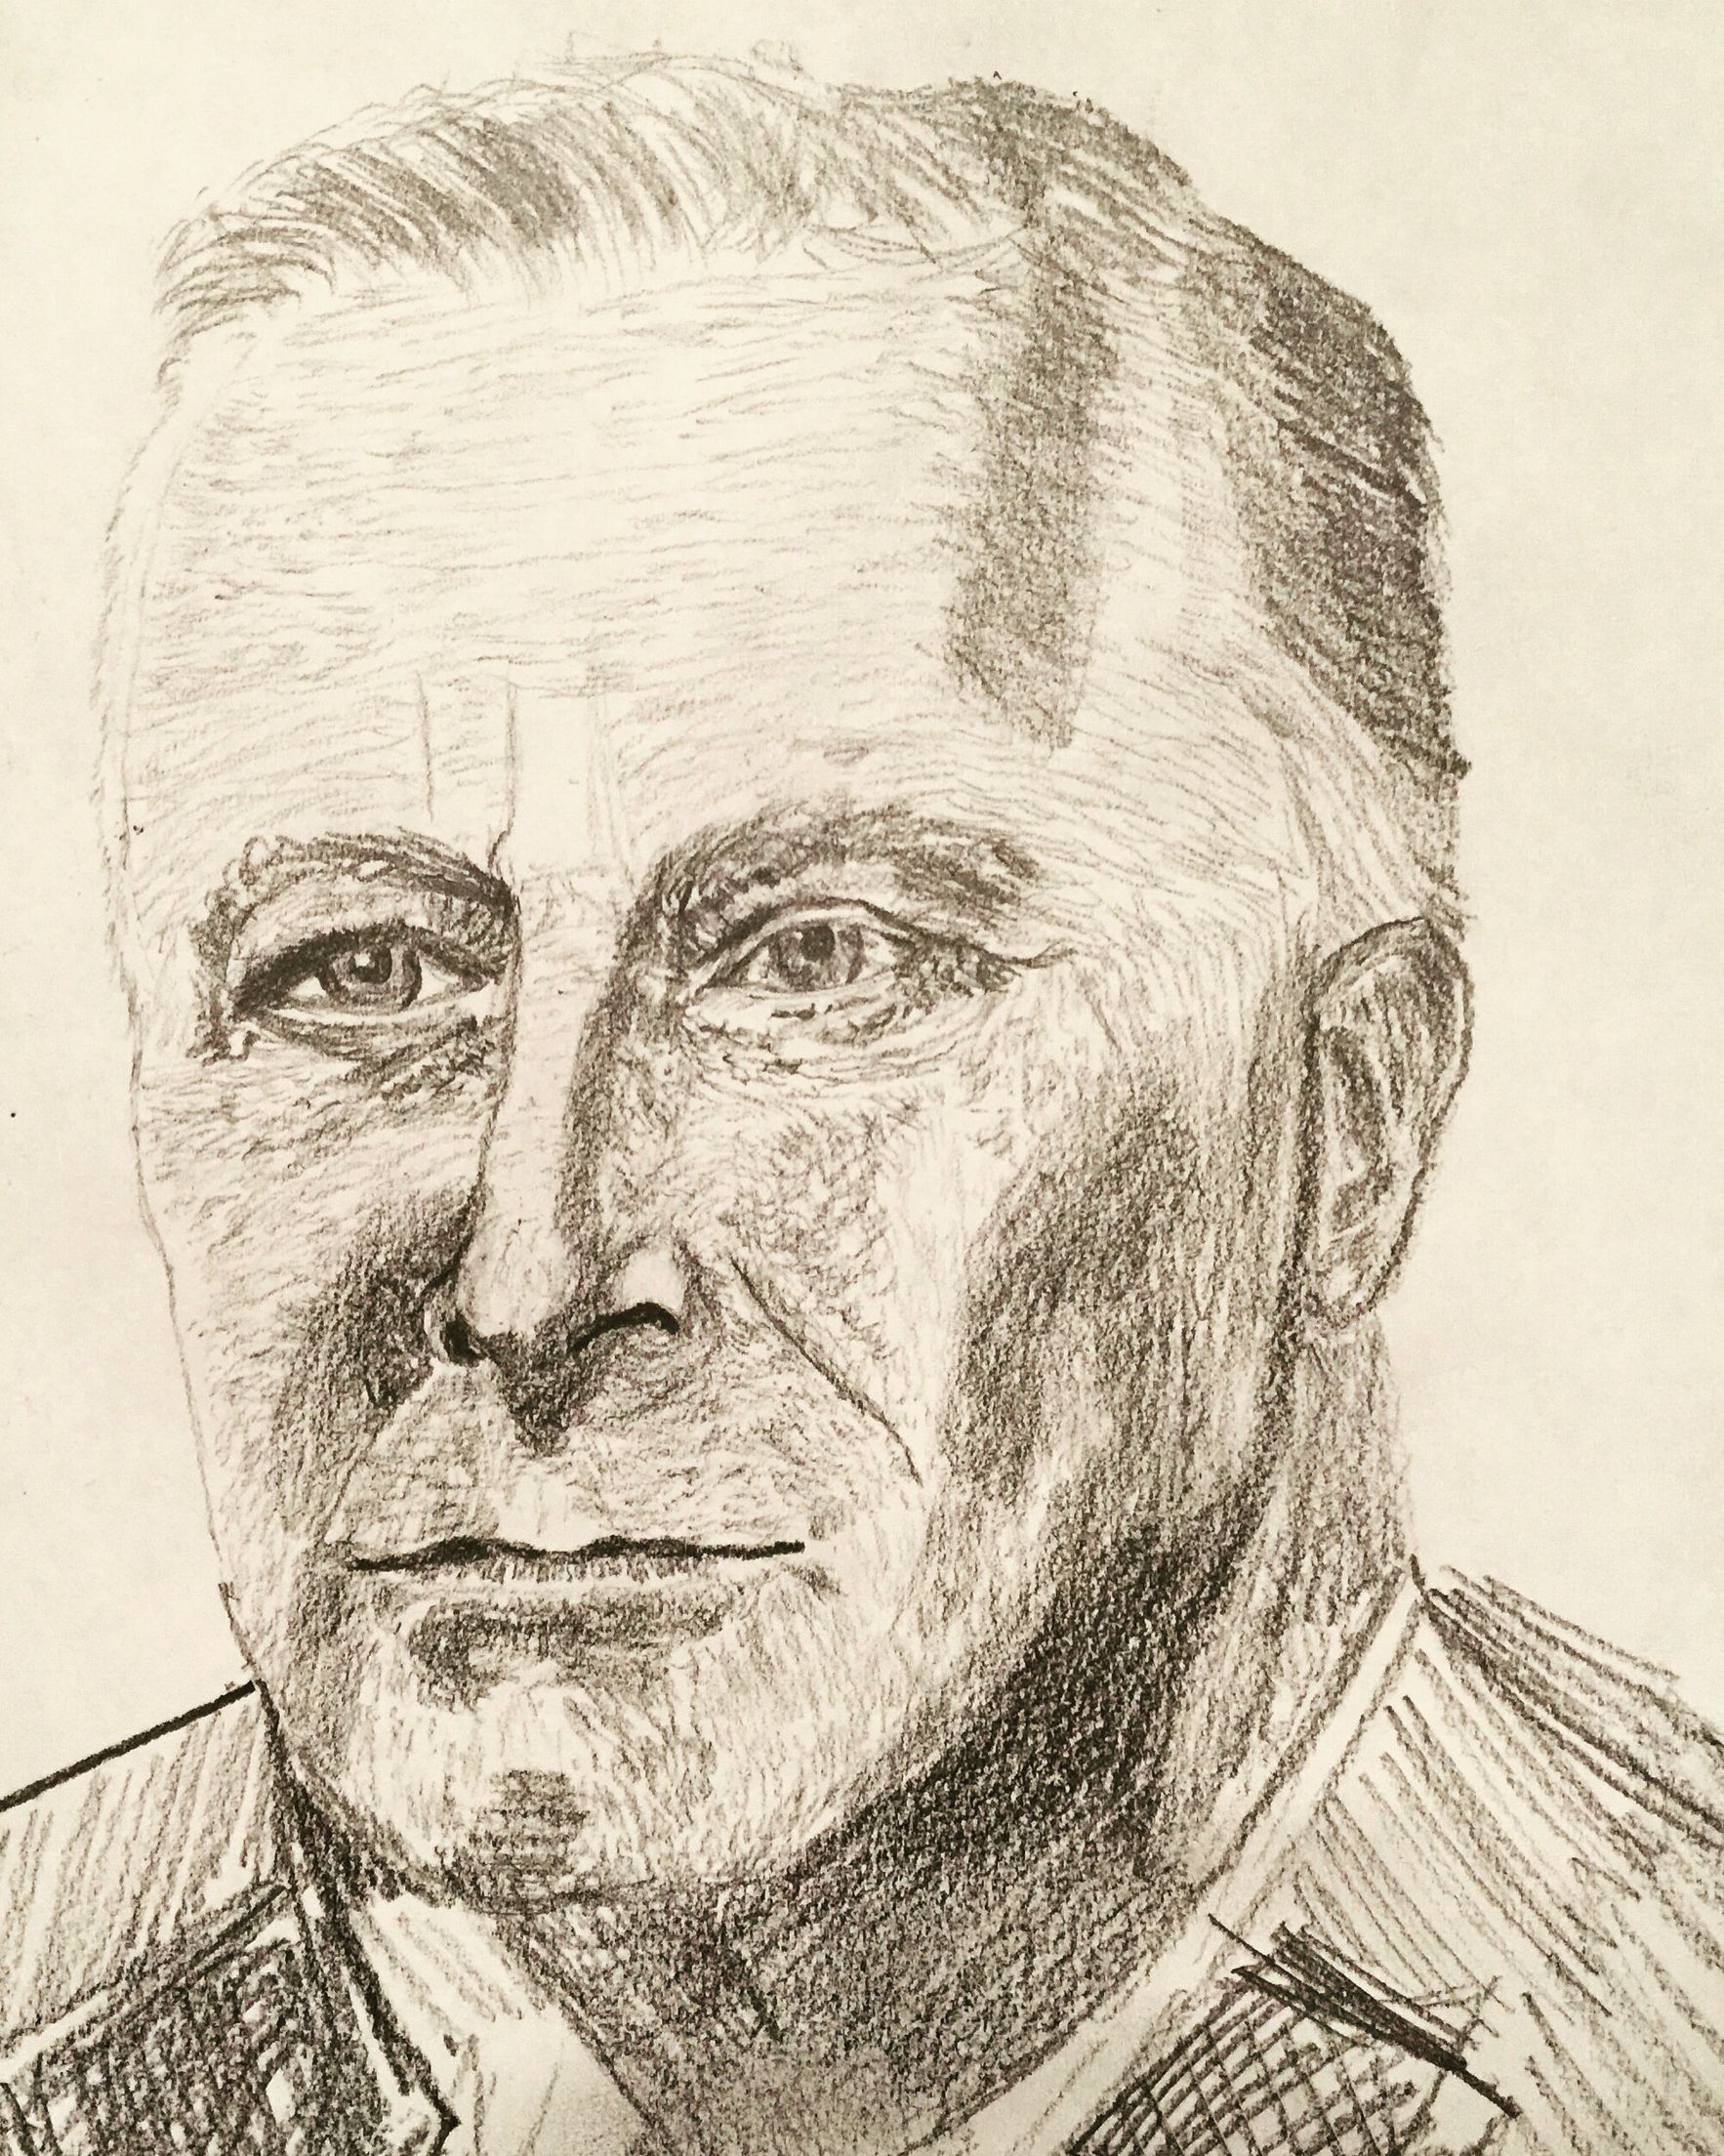 The best free Fdr drawing images. Download from 19 free drawings of Fdr